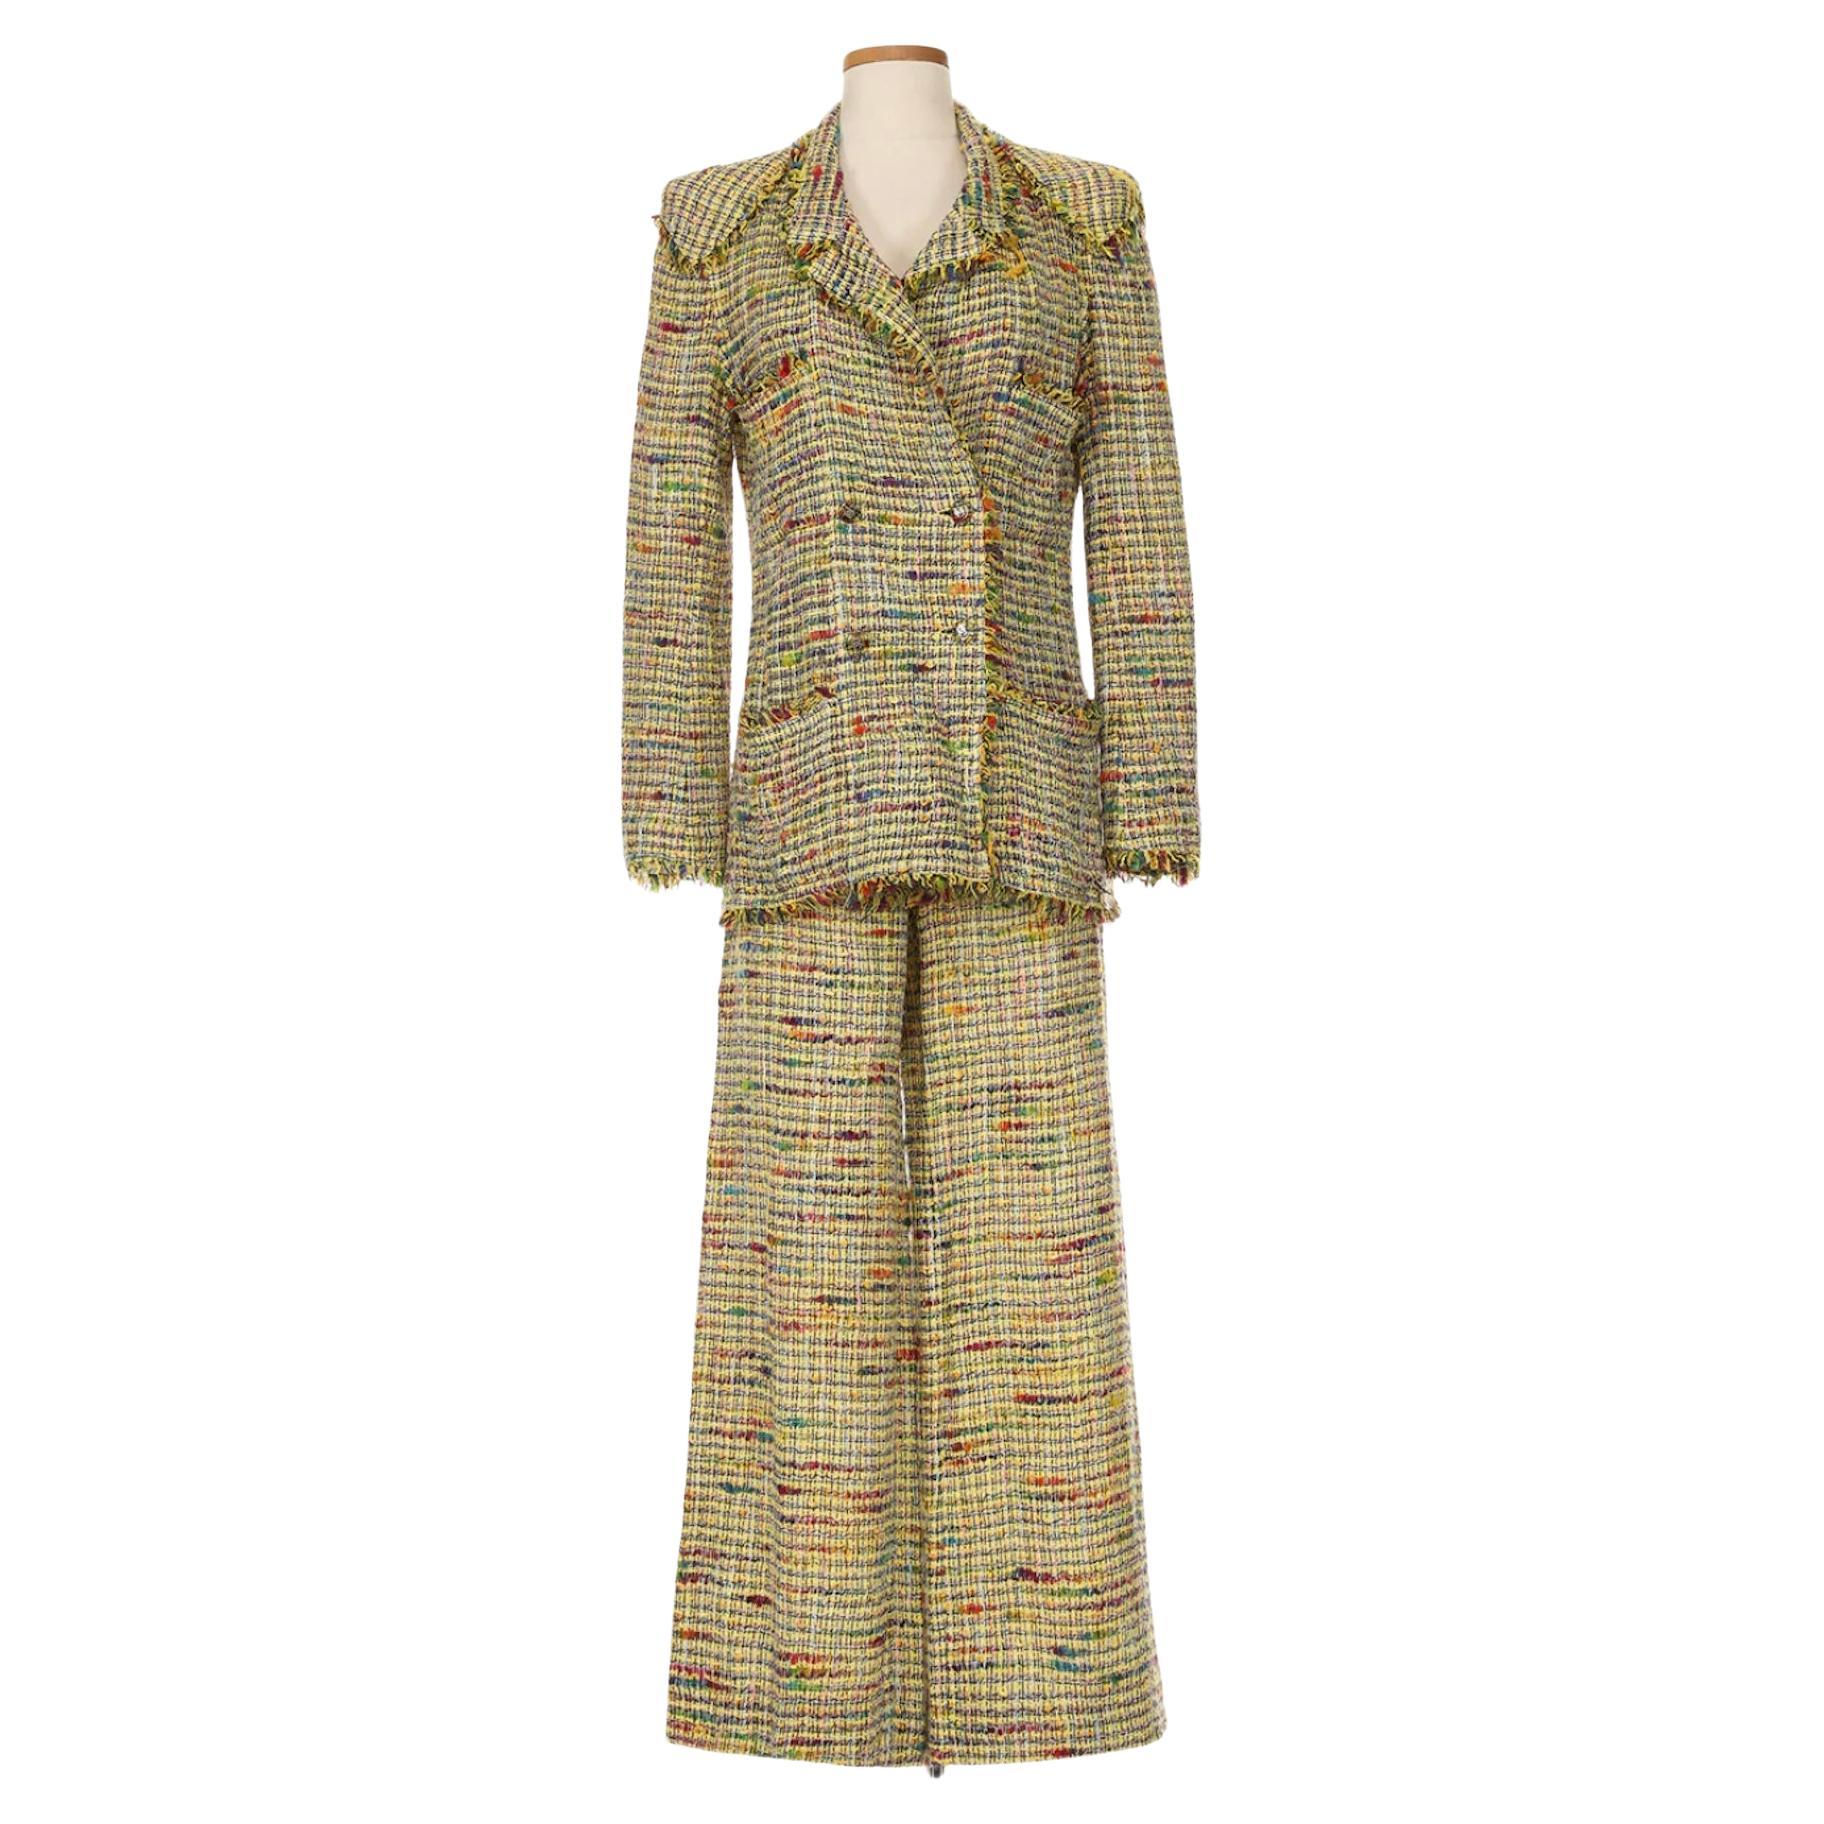 Chanel Spring 1998 Tweed Pant Suit For Sale